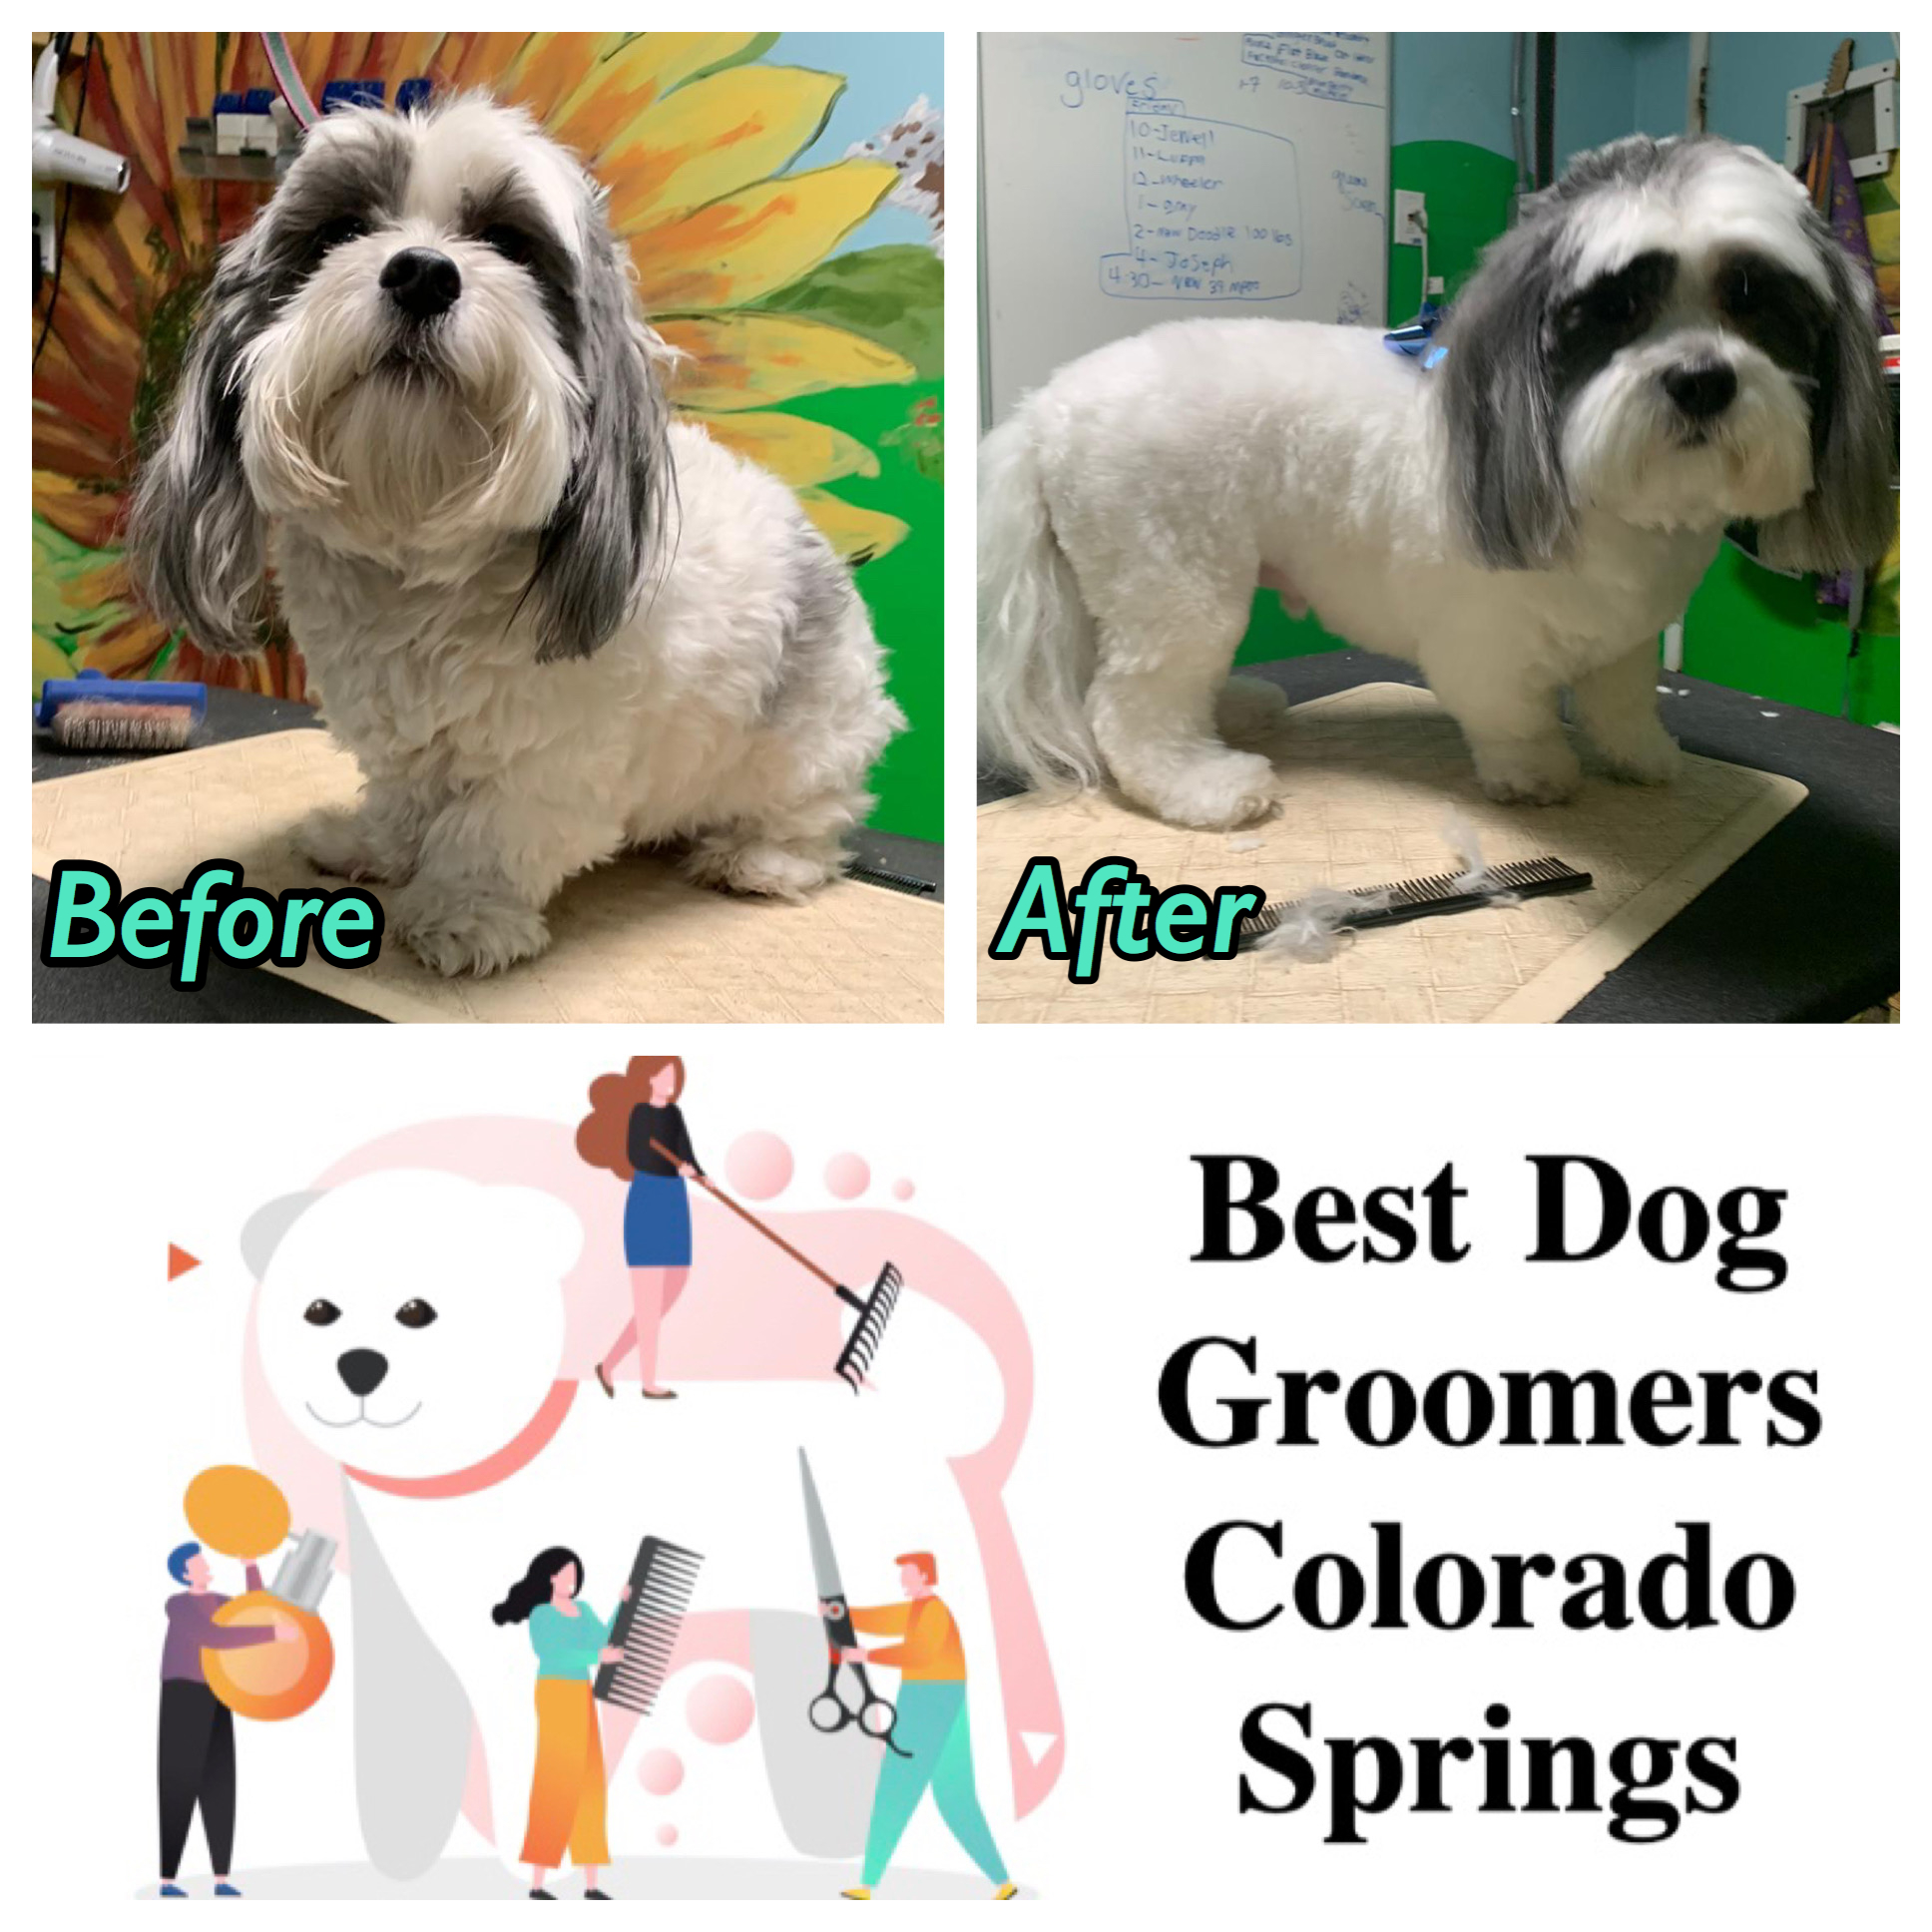 Top Dog Groomer Colorado Springs of the decade Check it out now 